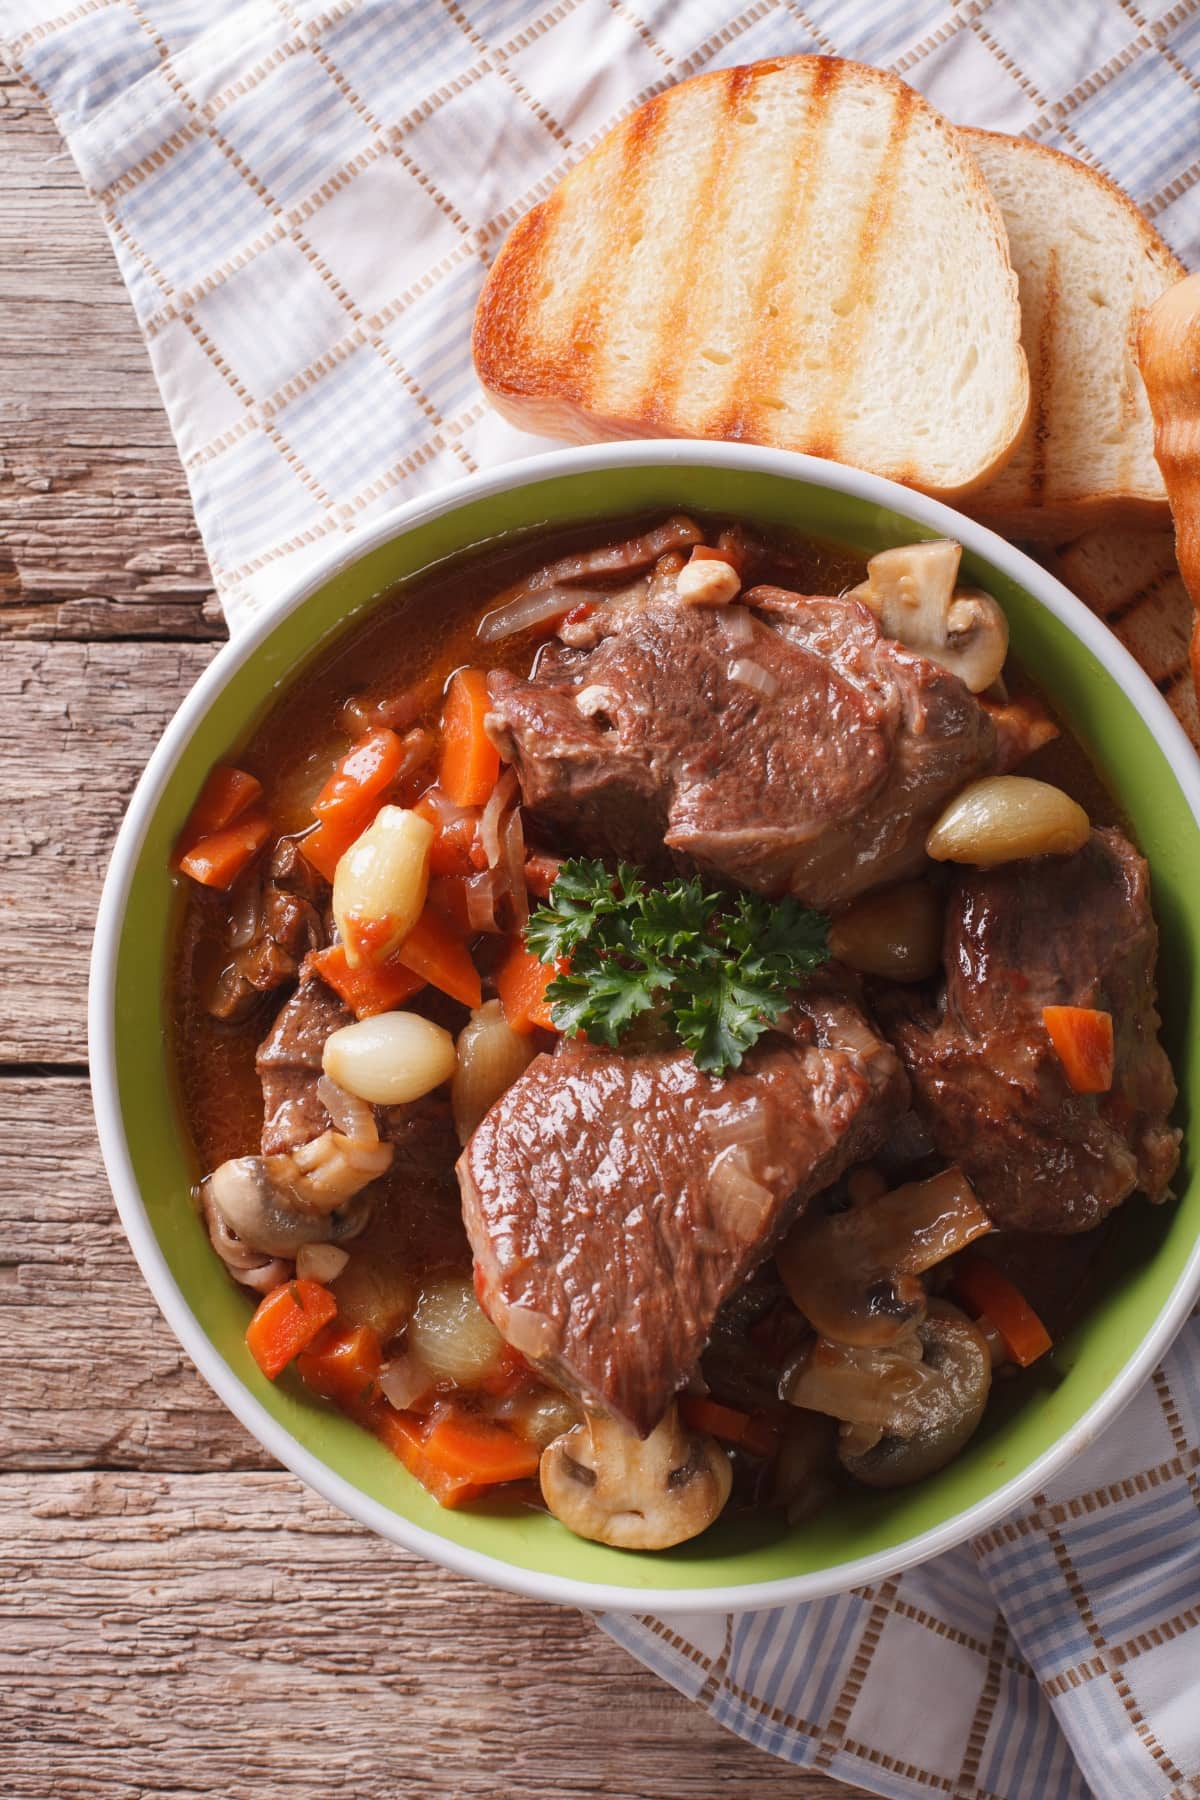 Homemade Beef Bourguignon with Carrots, Beans and Bread